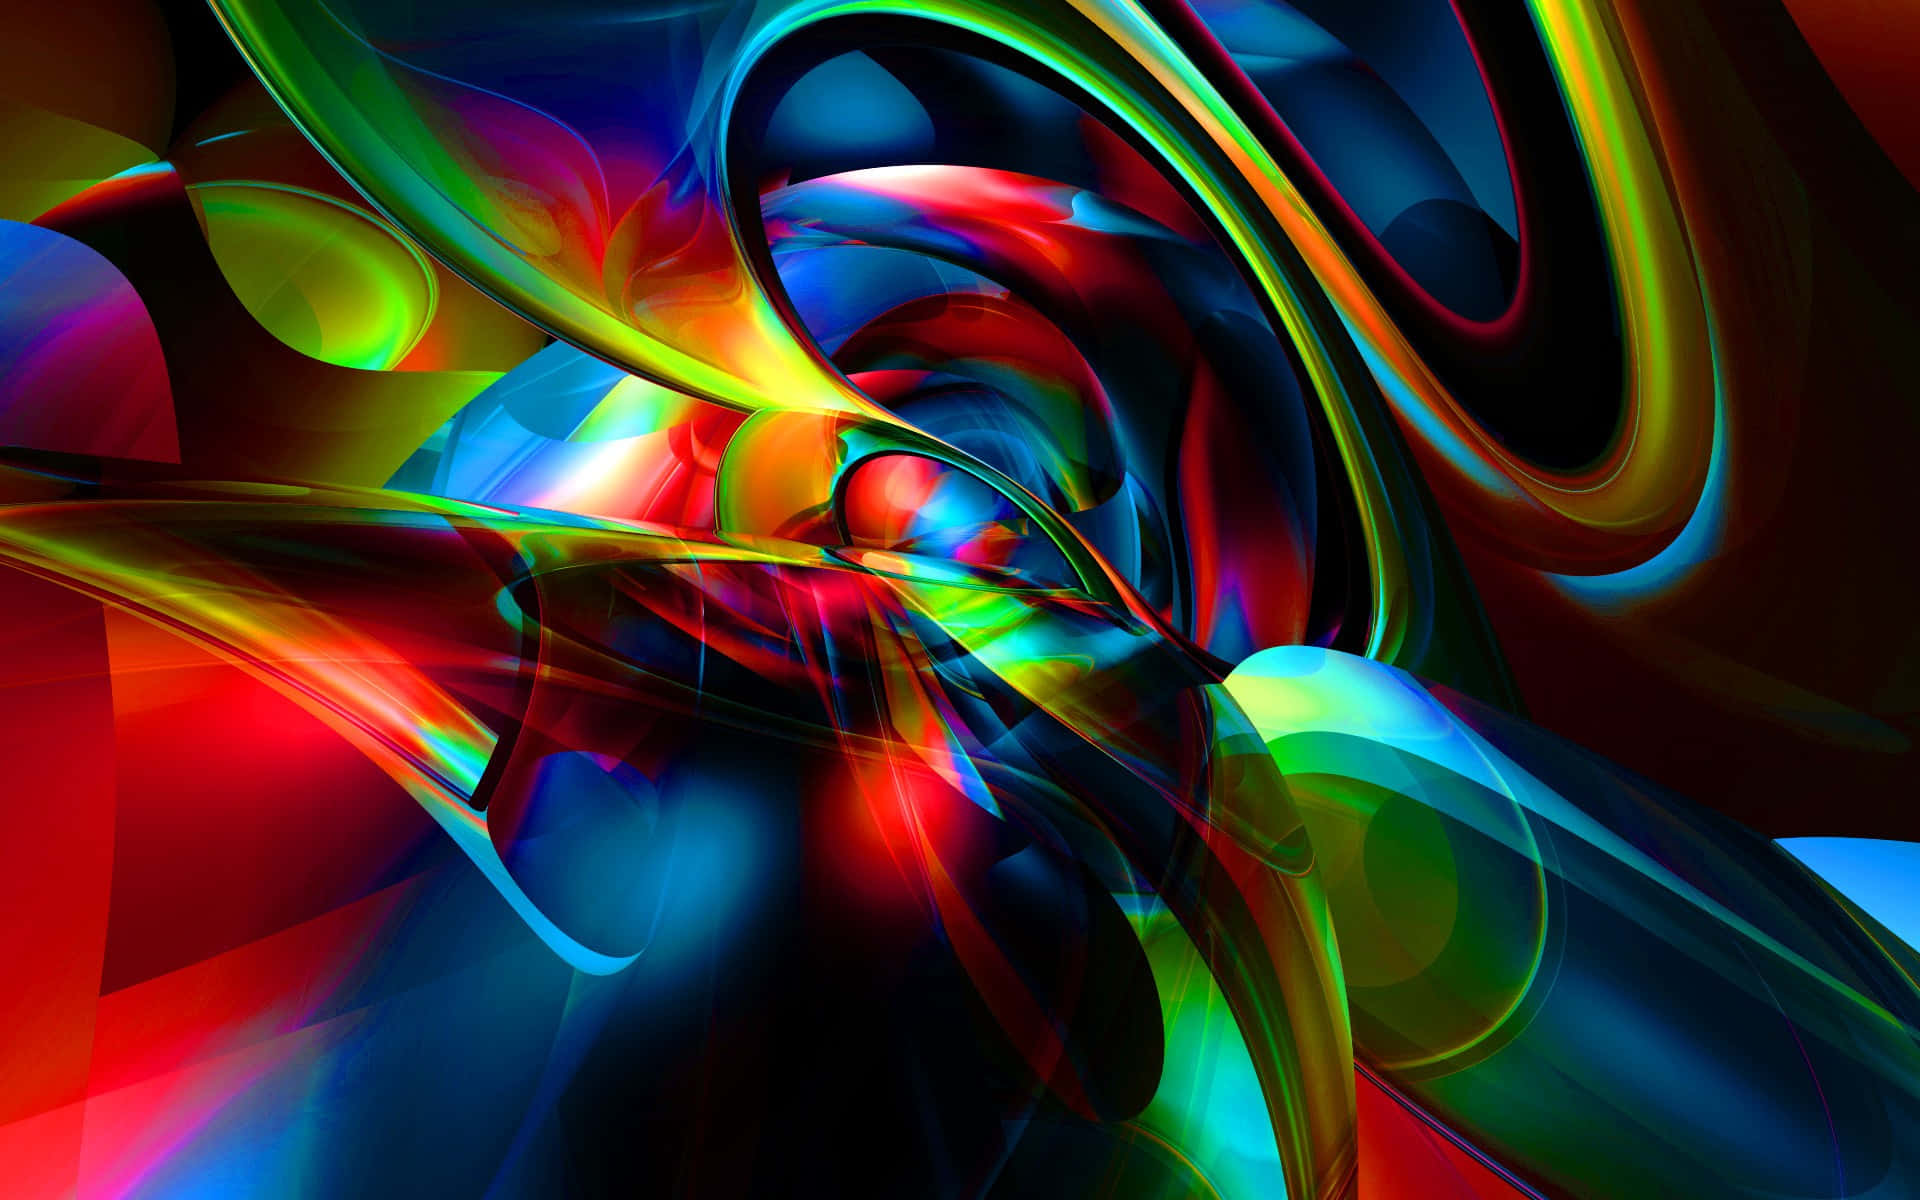 Several Colors On Abstract Art Wallpaper